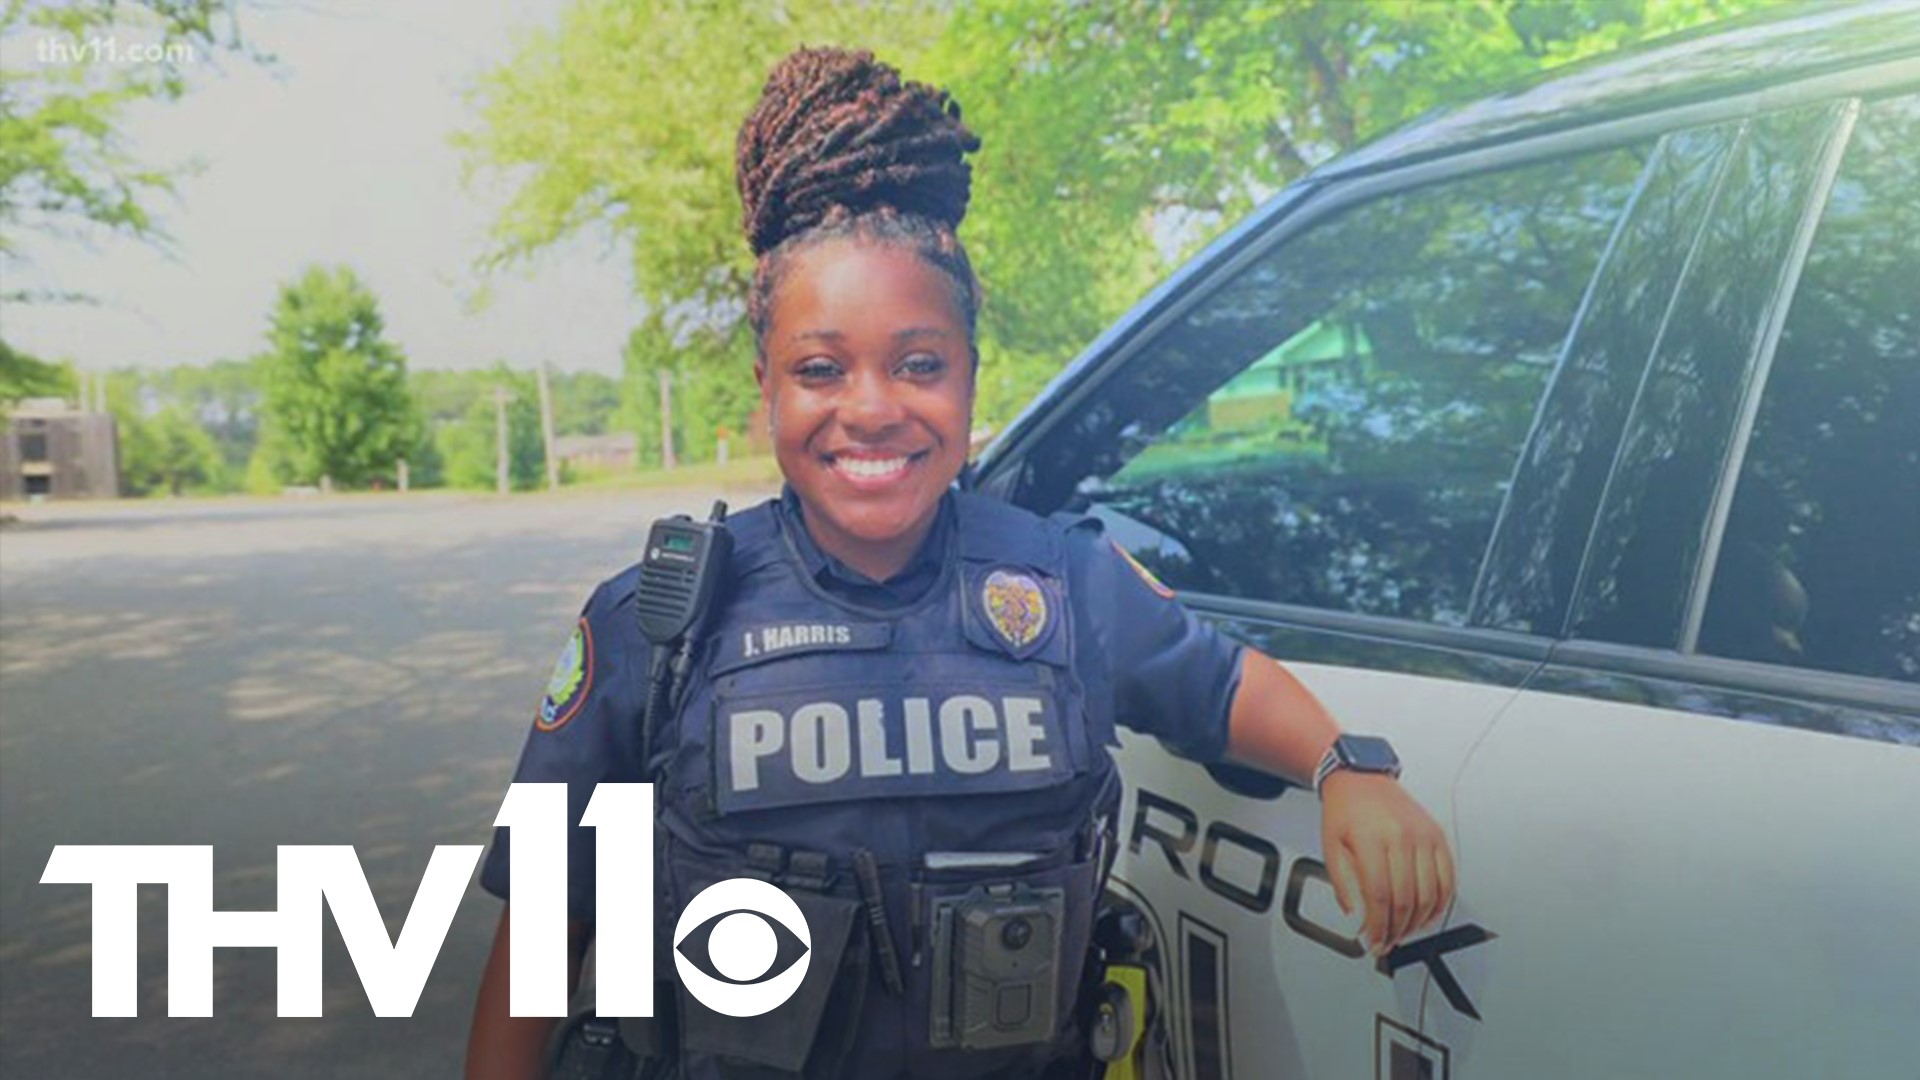 If you've been pulled over or ever had to call the police for an emergency, how many times have you seen a woman respond to the call?